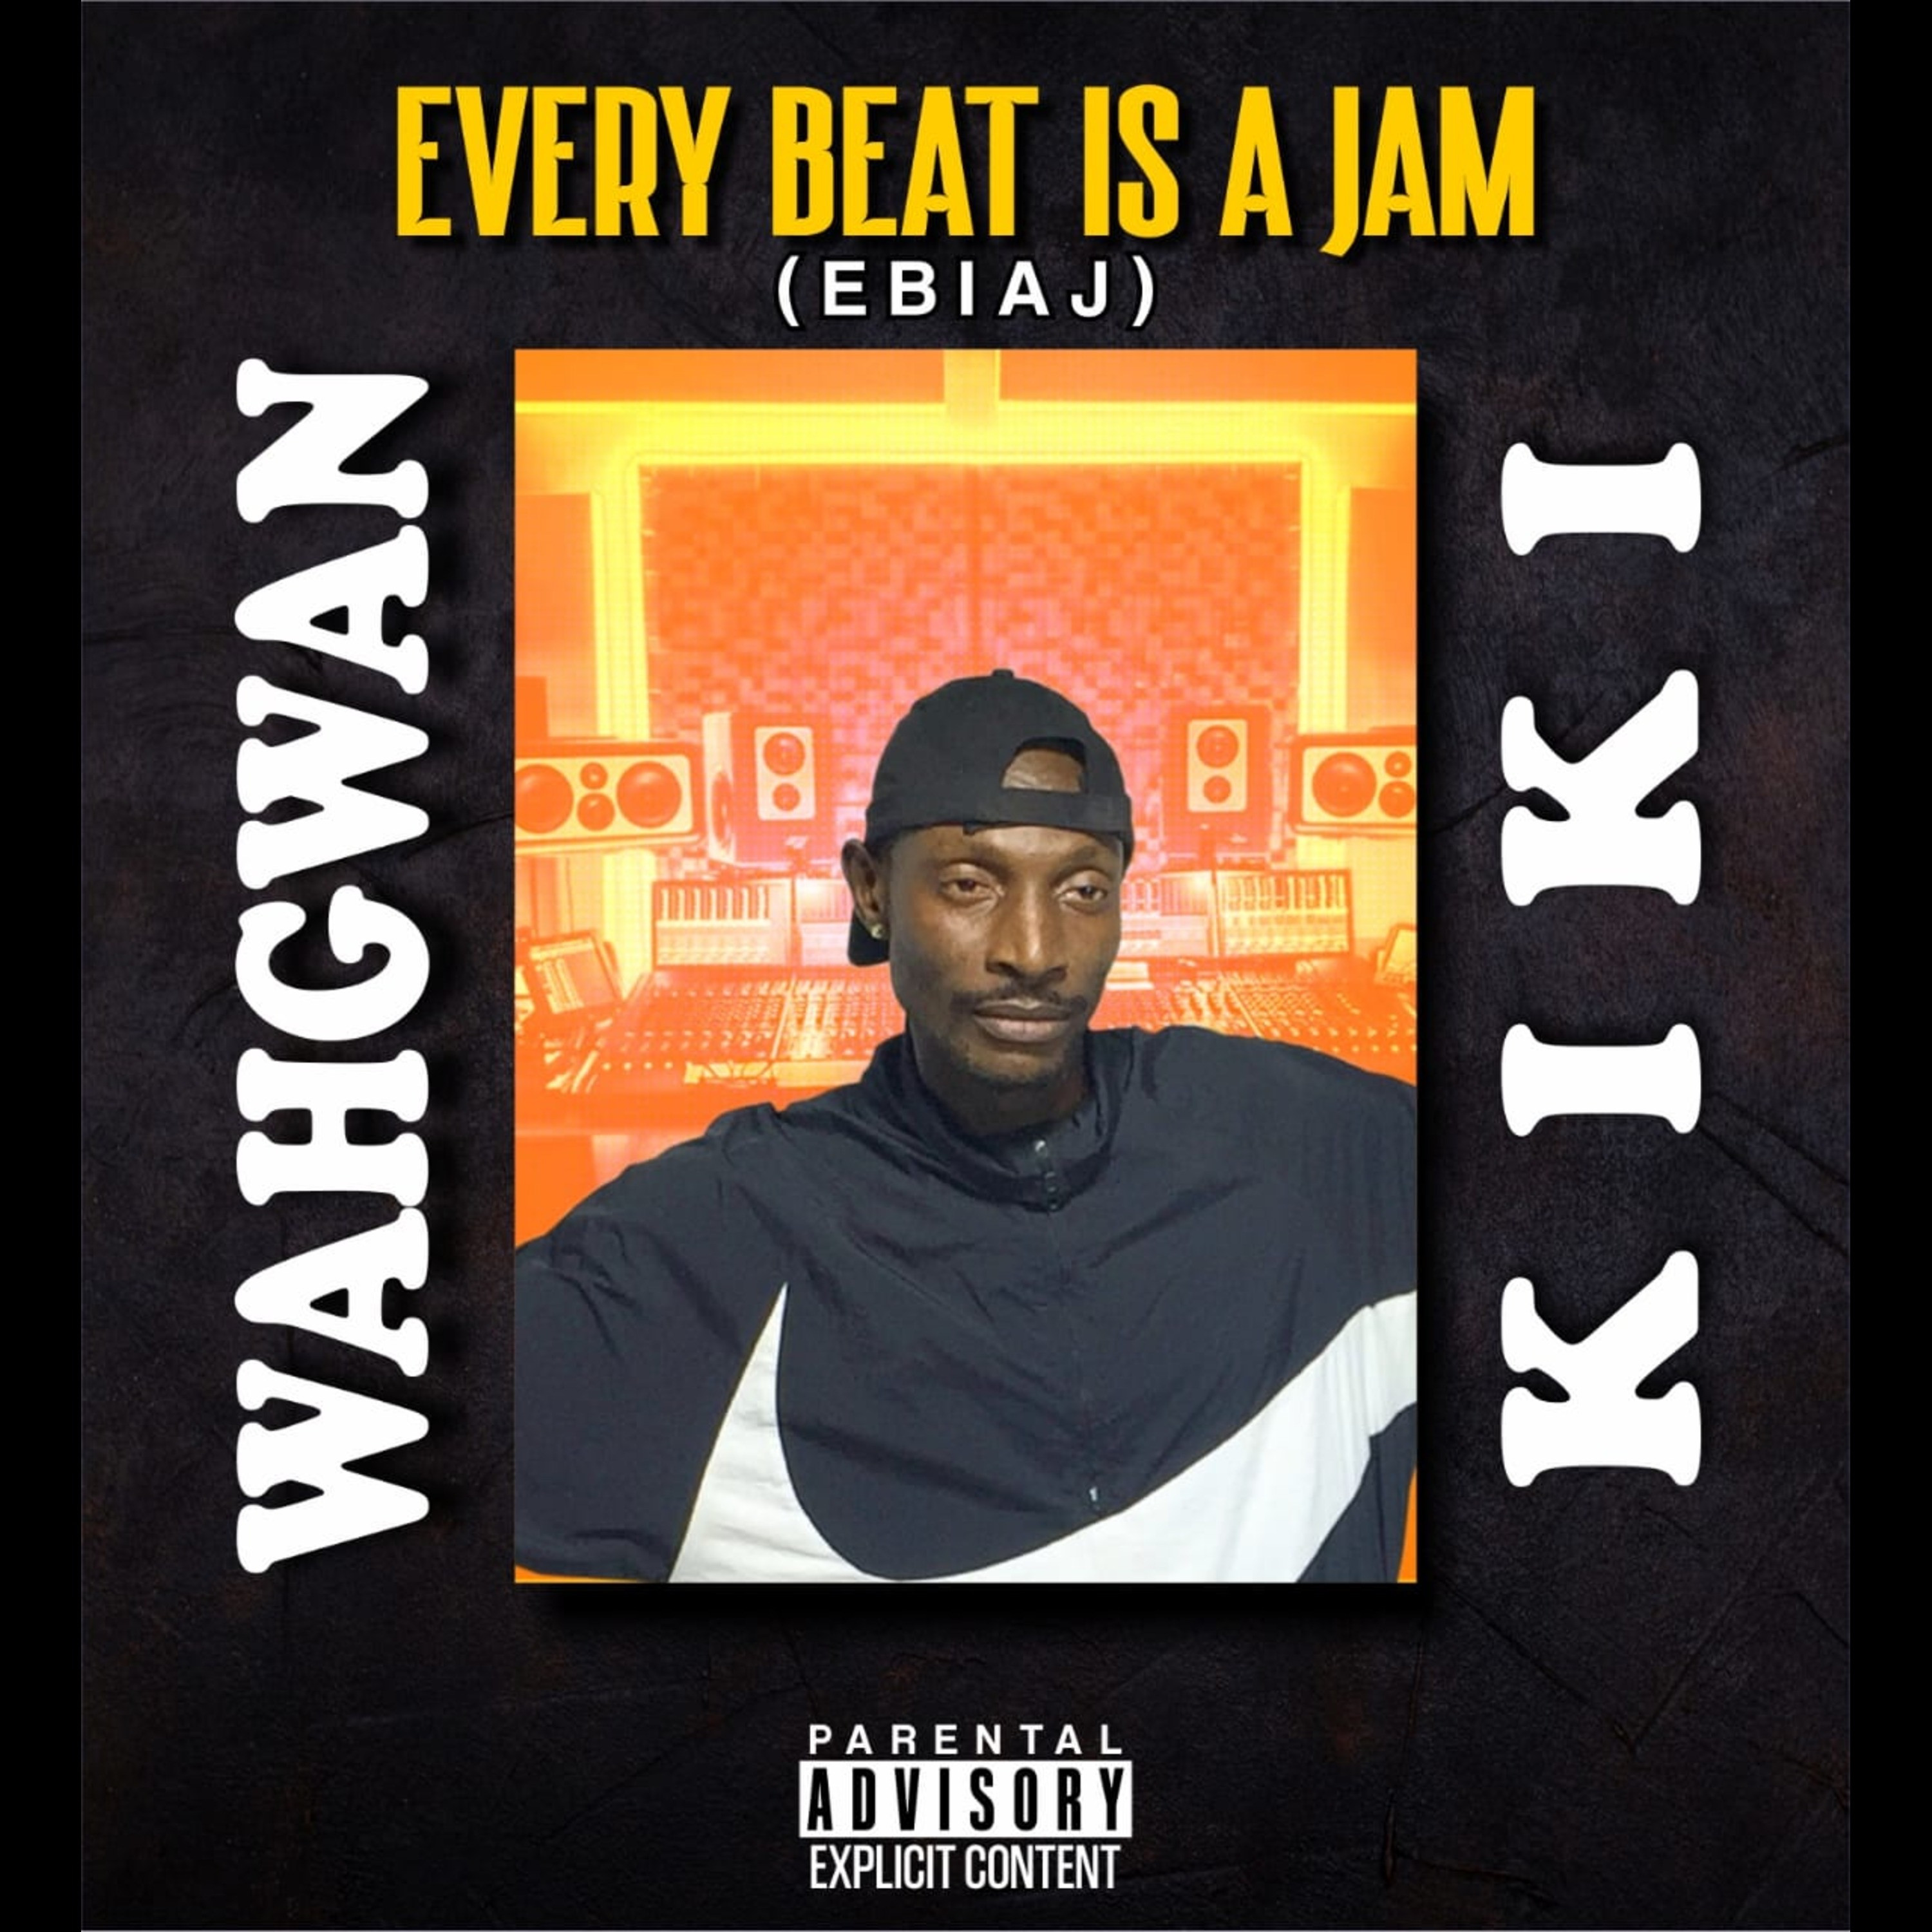 Wahgwan Kiki Releases First Project “Every Beat Is A Jam EP”